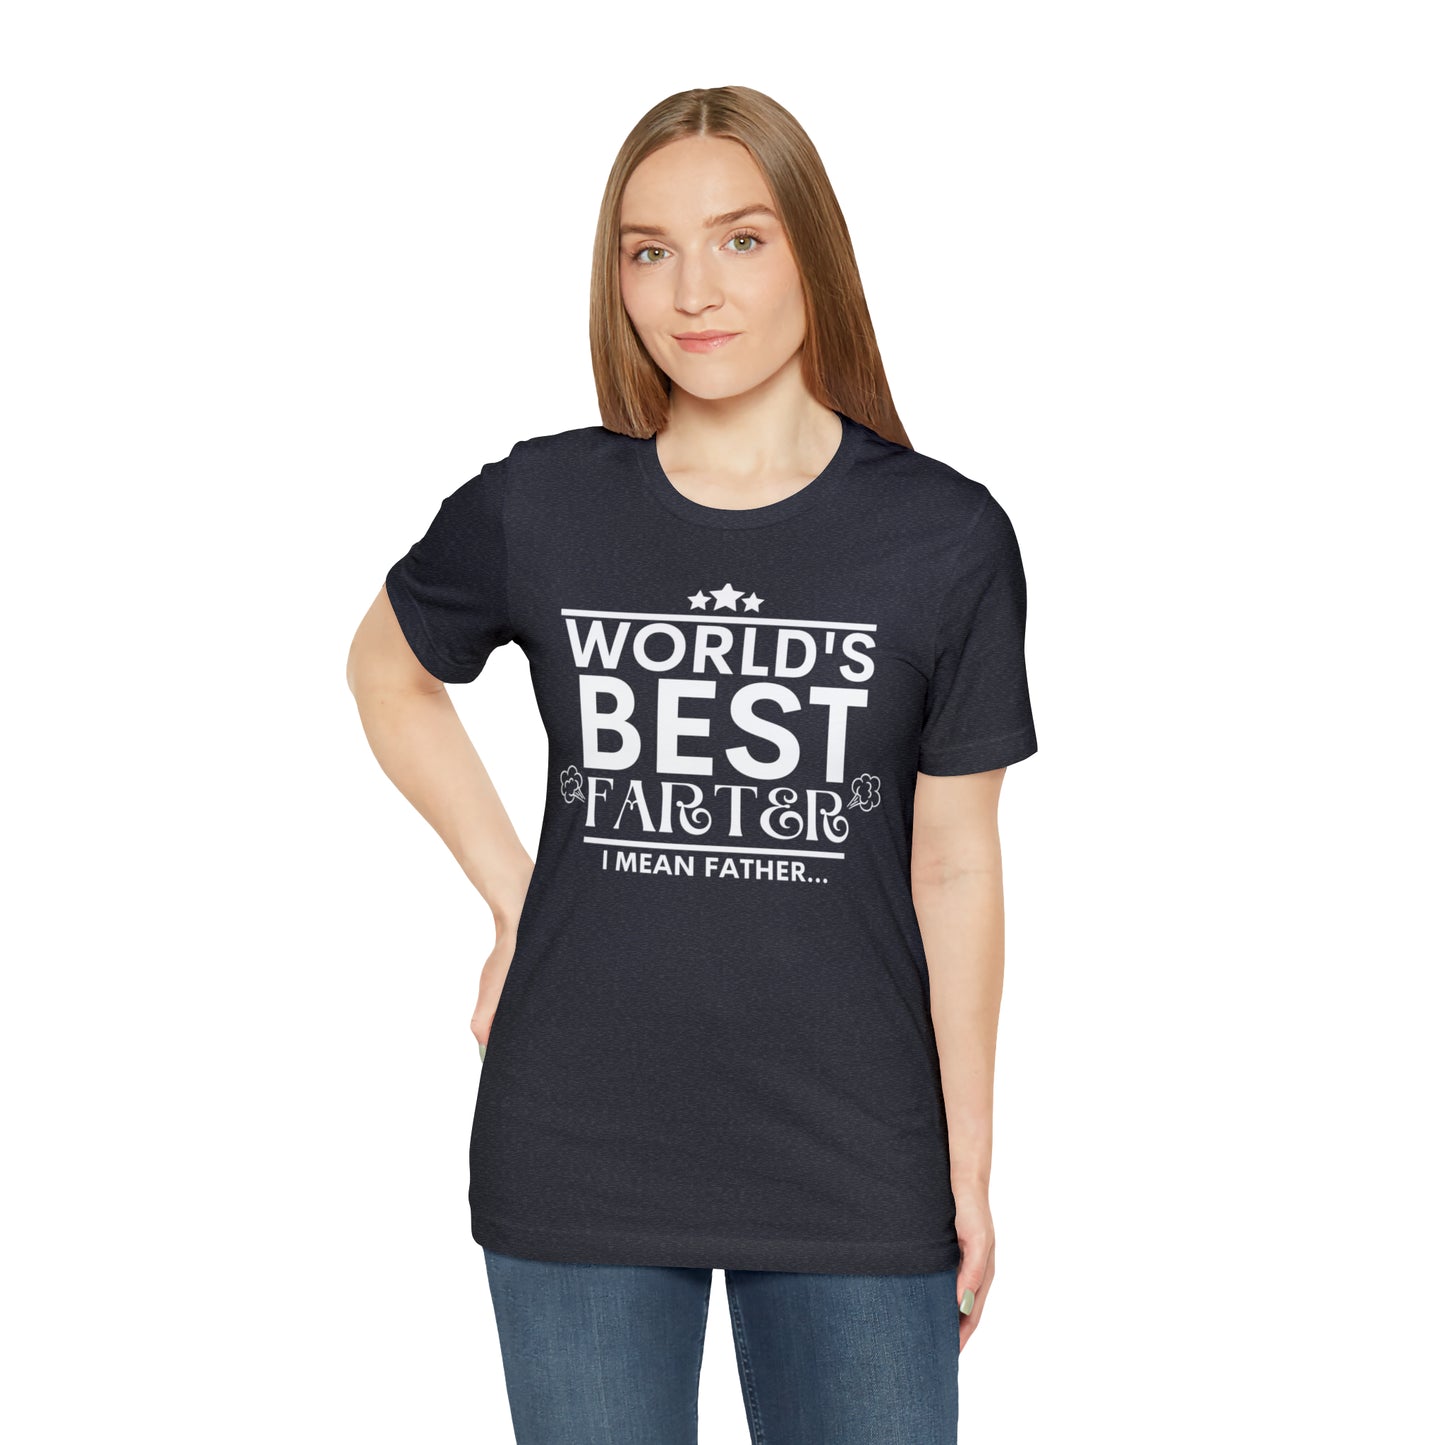 World's Best Farter T-shirt | Funny Dad T-shirt, Father's Day Gift, T-shirt For Dad, Best Dad Tee, Husband T-shirt, Funny Men's Shirt